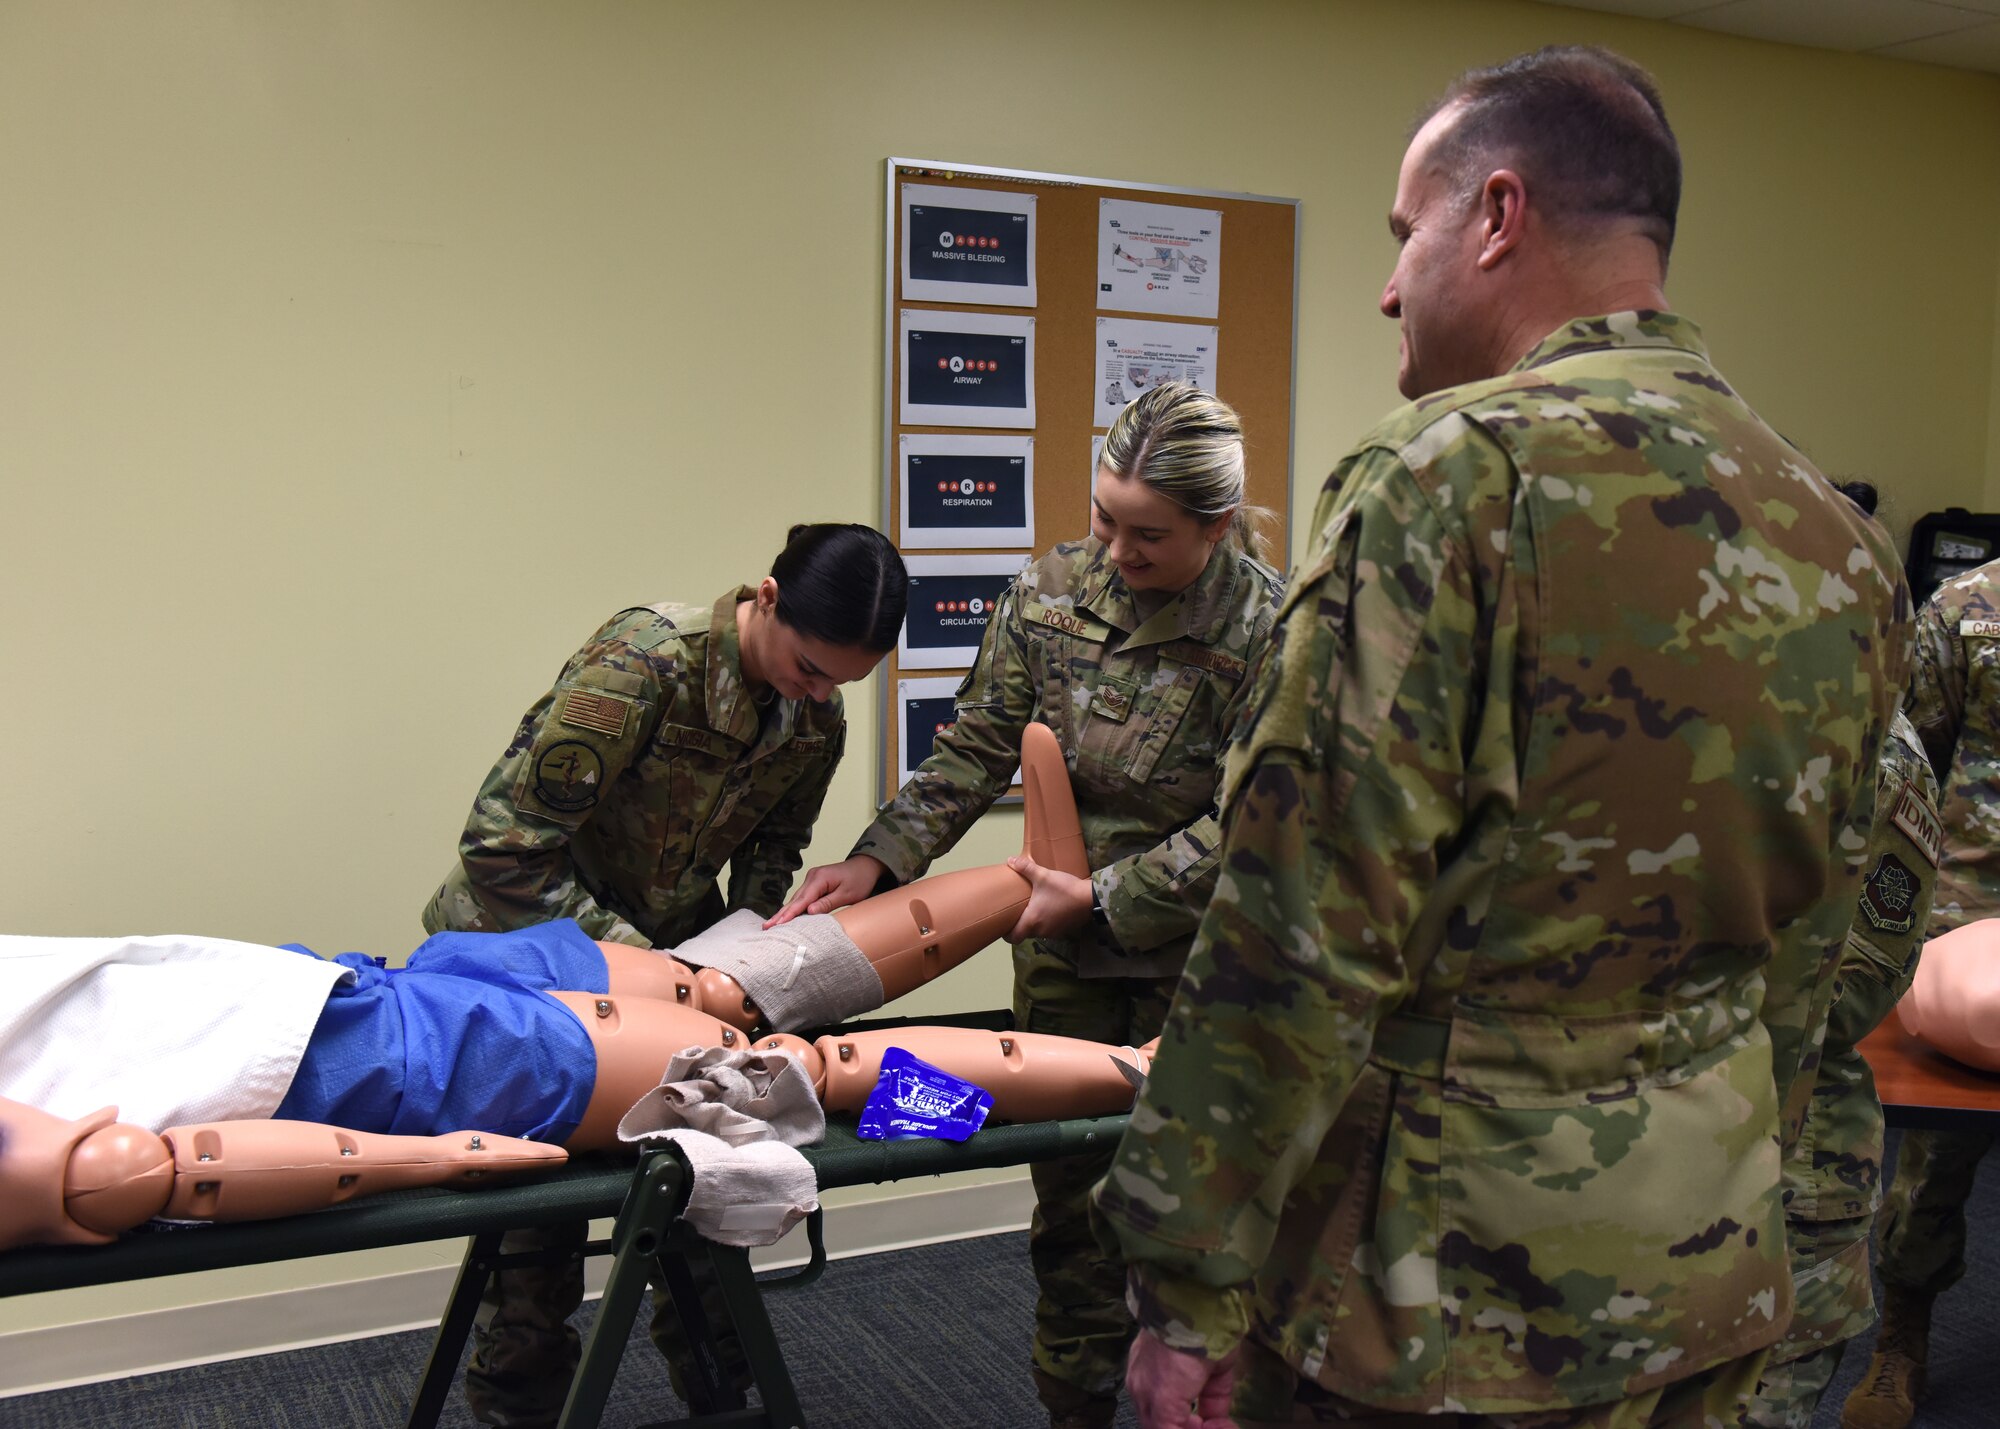 U.S. Air Force Maj. Gen. Thad Bibb, 18th Air Force commander, observes two 62nd Medical Squadron Airmen as they demonstrate first aid procedures at Joint Base Lewis-McChord, Washington, March 15, 2022. Bibb and U.S. Air Force Chief Master Sgt. Chad Bickley, 18th AF command chief, visited 62nd AW units and recognized several of the wing’s outstanding performers during their time. (U.S. Air Force photo/Senior Airman Zoe Thacker)